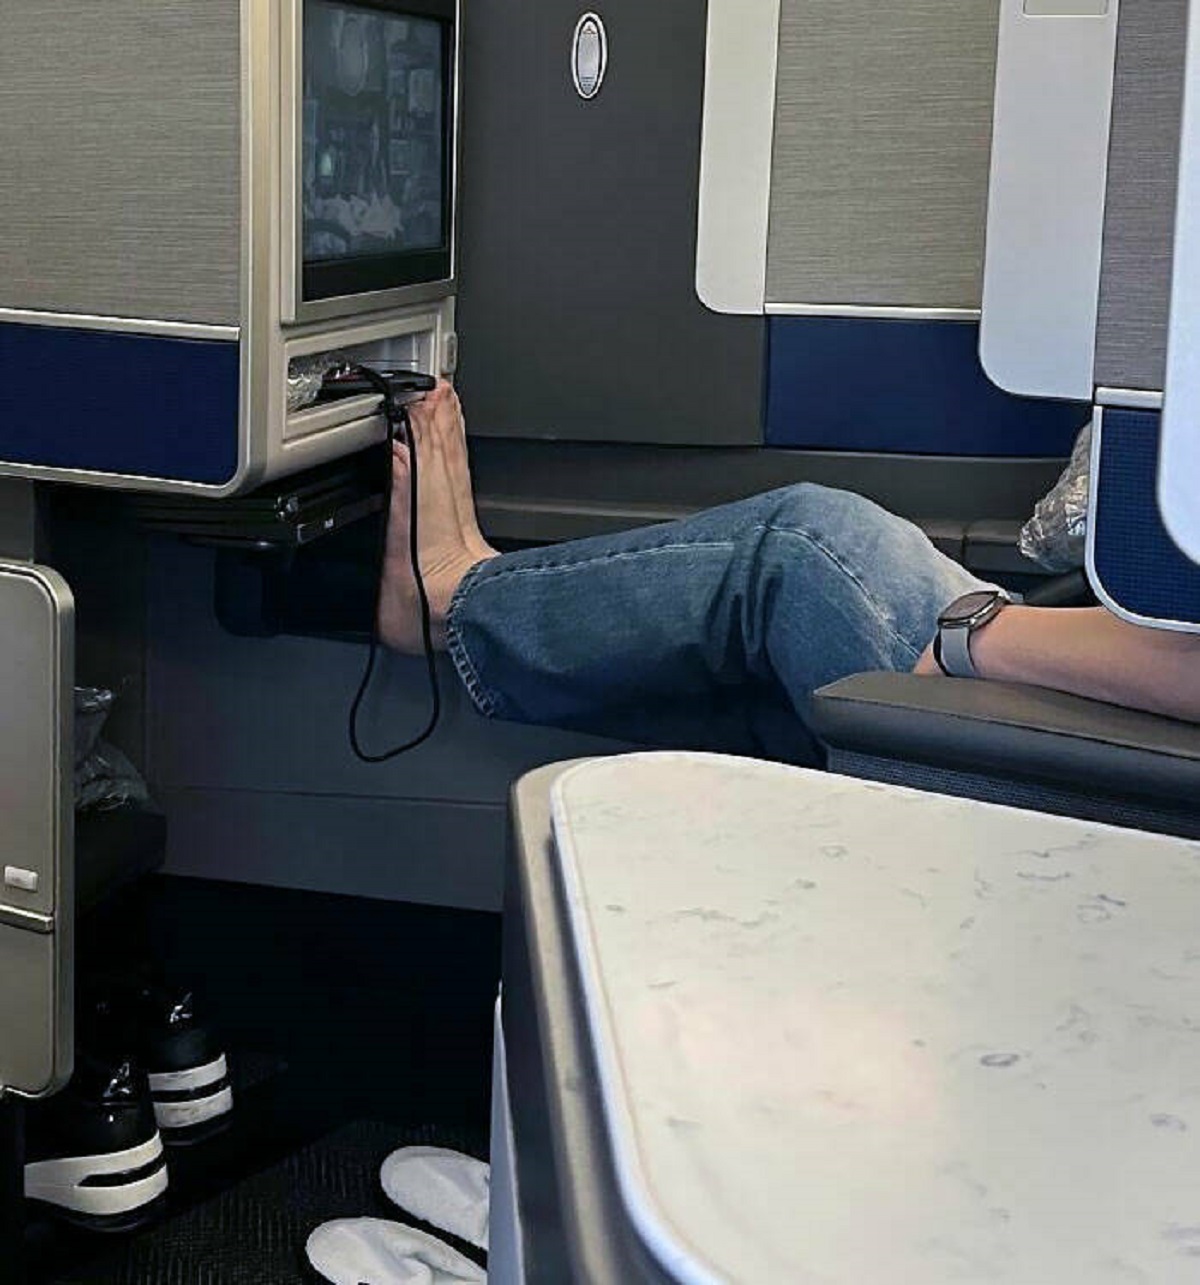 "Naked Feet On Planes Should Be Illegal No Matter How Far Apart We Are"